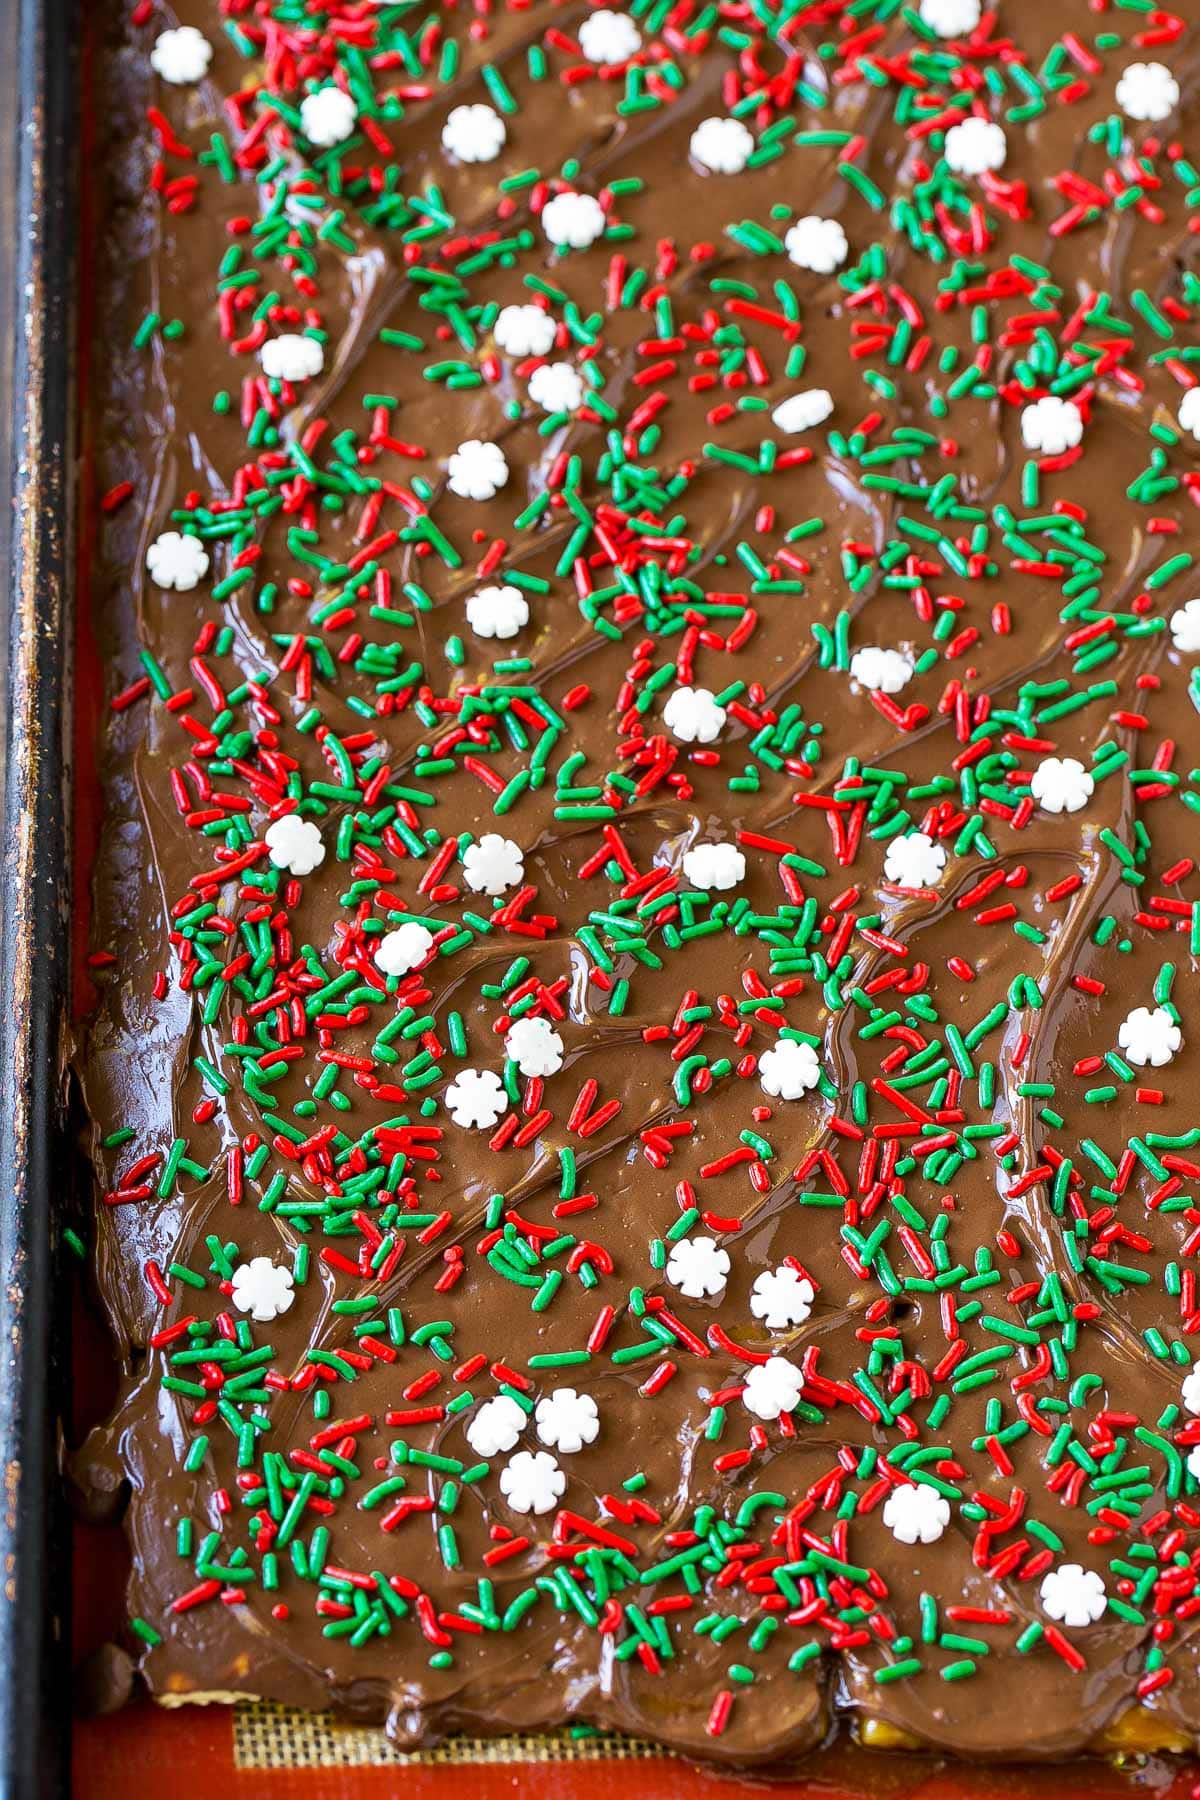 A pan of toffee covered in chocolate and sprinkles.